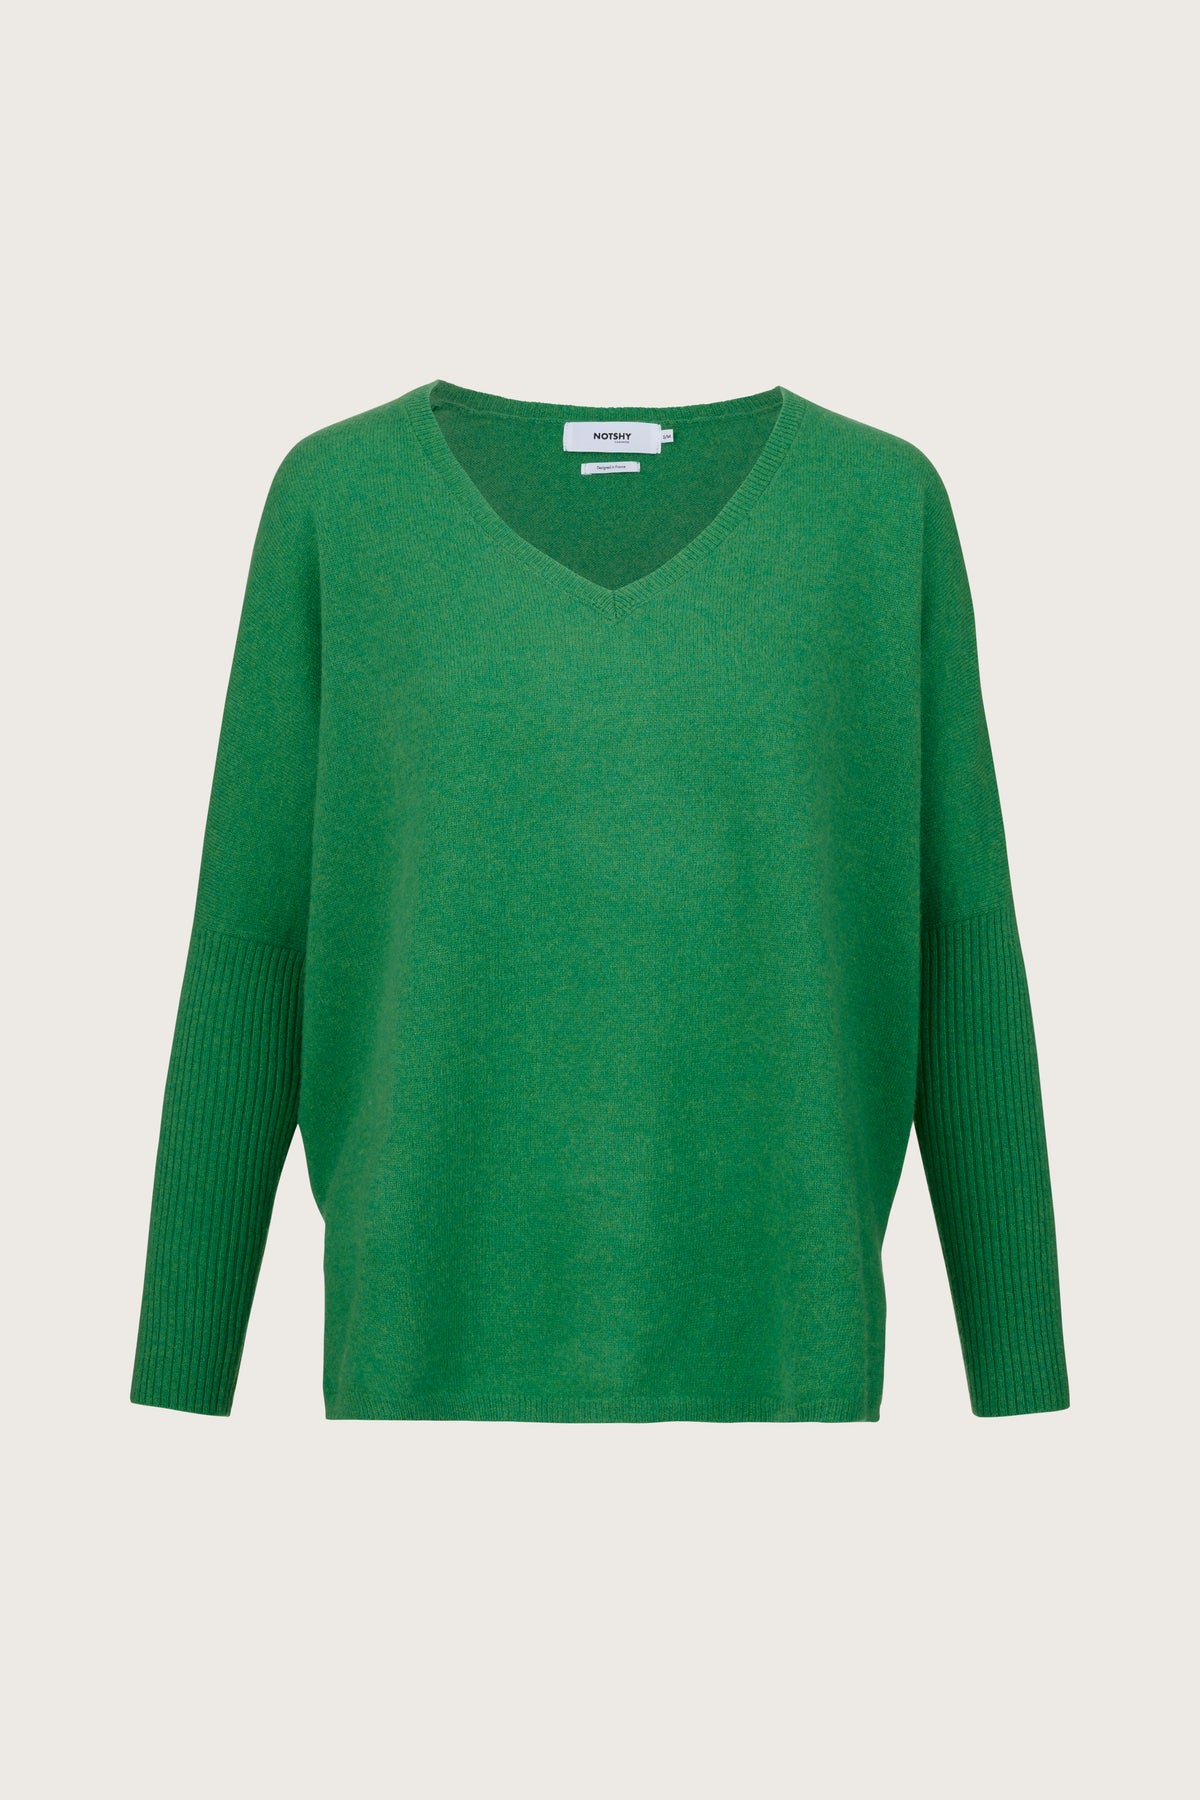 Green V neck dropped shouldered cashmere jumper with ribbed sleeves